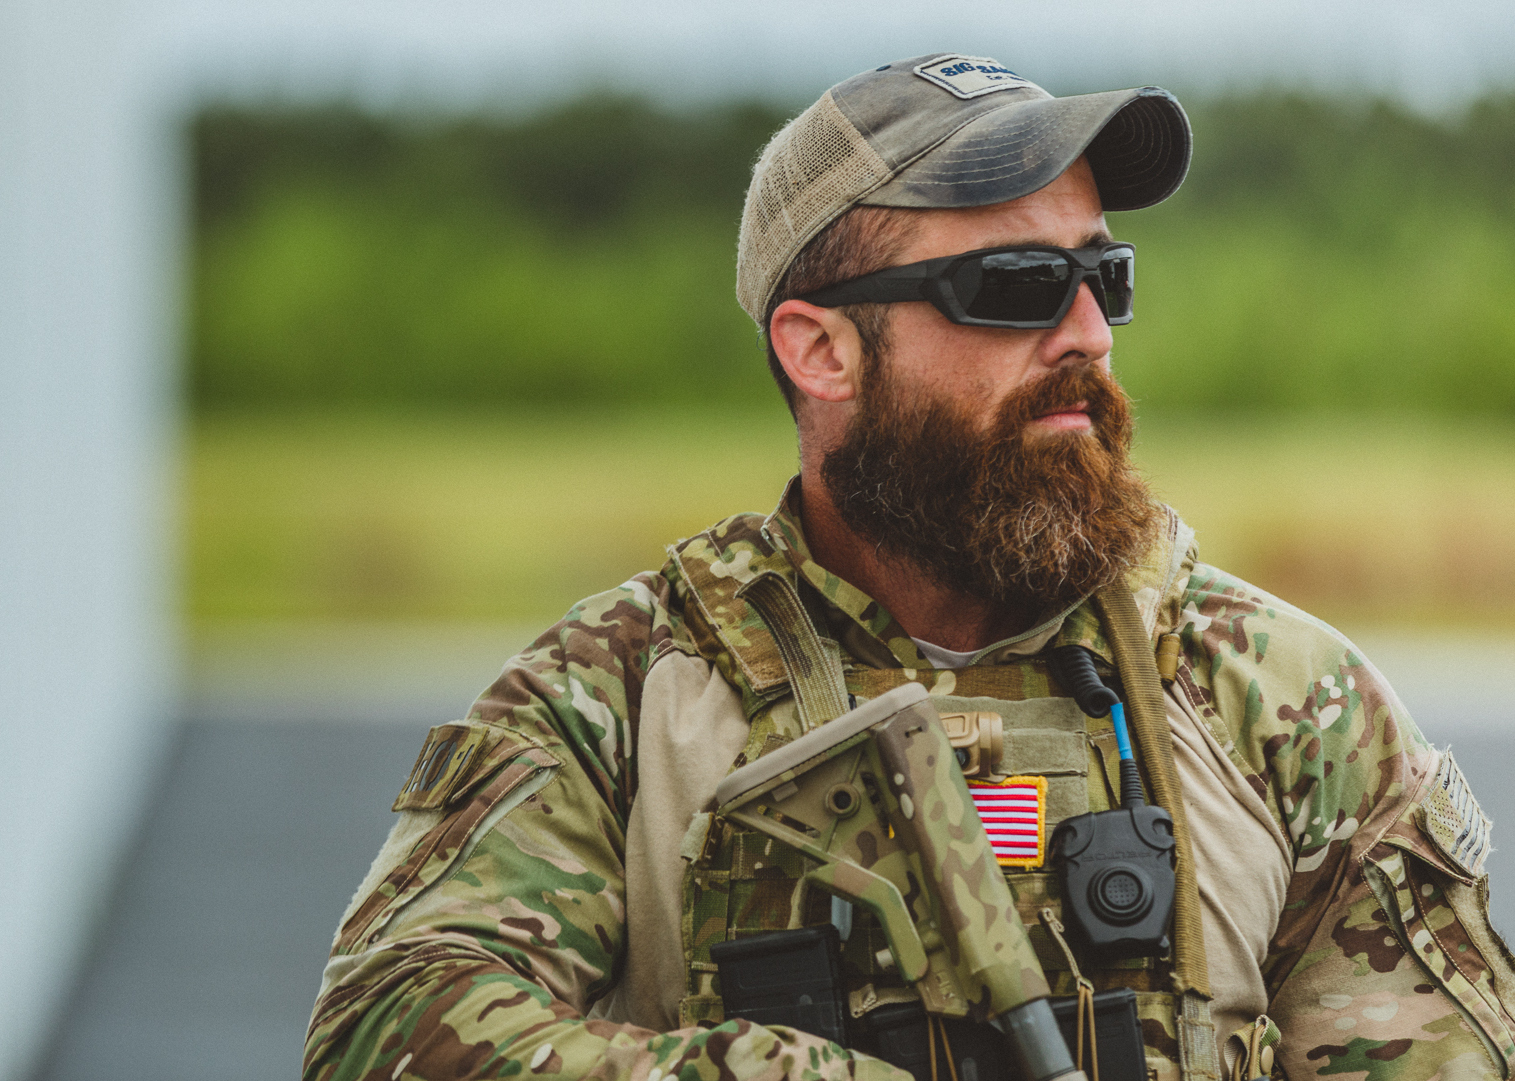 Revision’s ShadowStrike™ Tactical Ballistic Sunglasses have a sharp, geometrical wraparound design that provides unobstructed field-of-vision and ballistic protection for fast-paced tactical, special